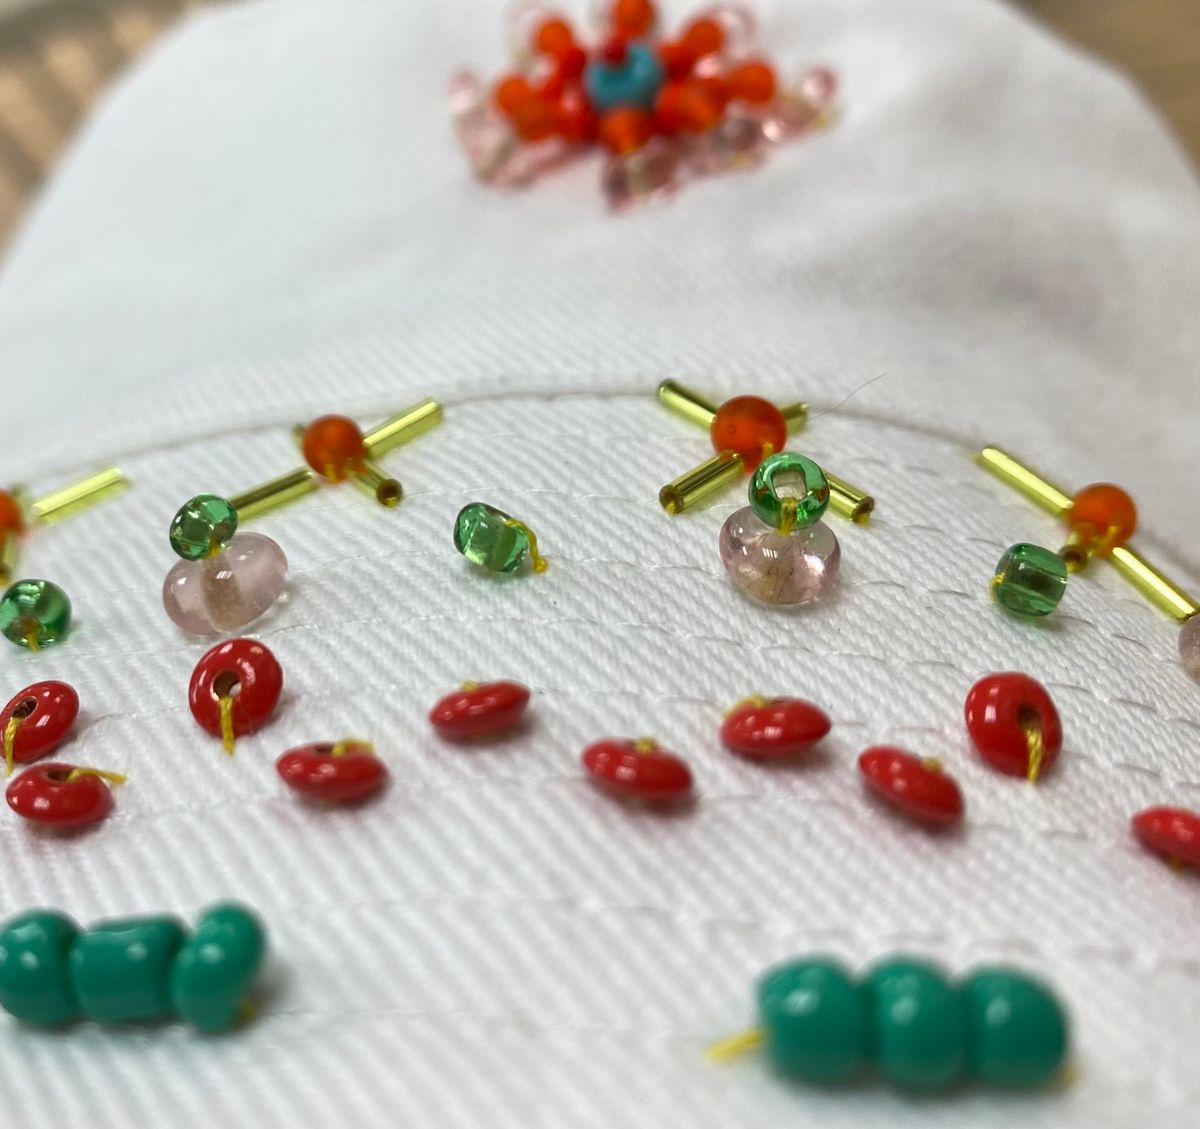 Chois beads embroidery work shop in July 